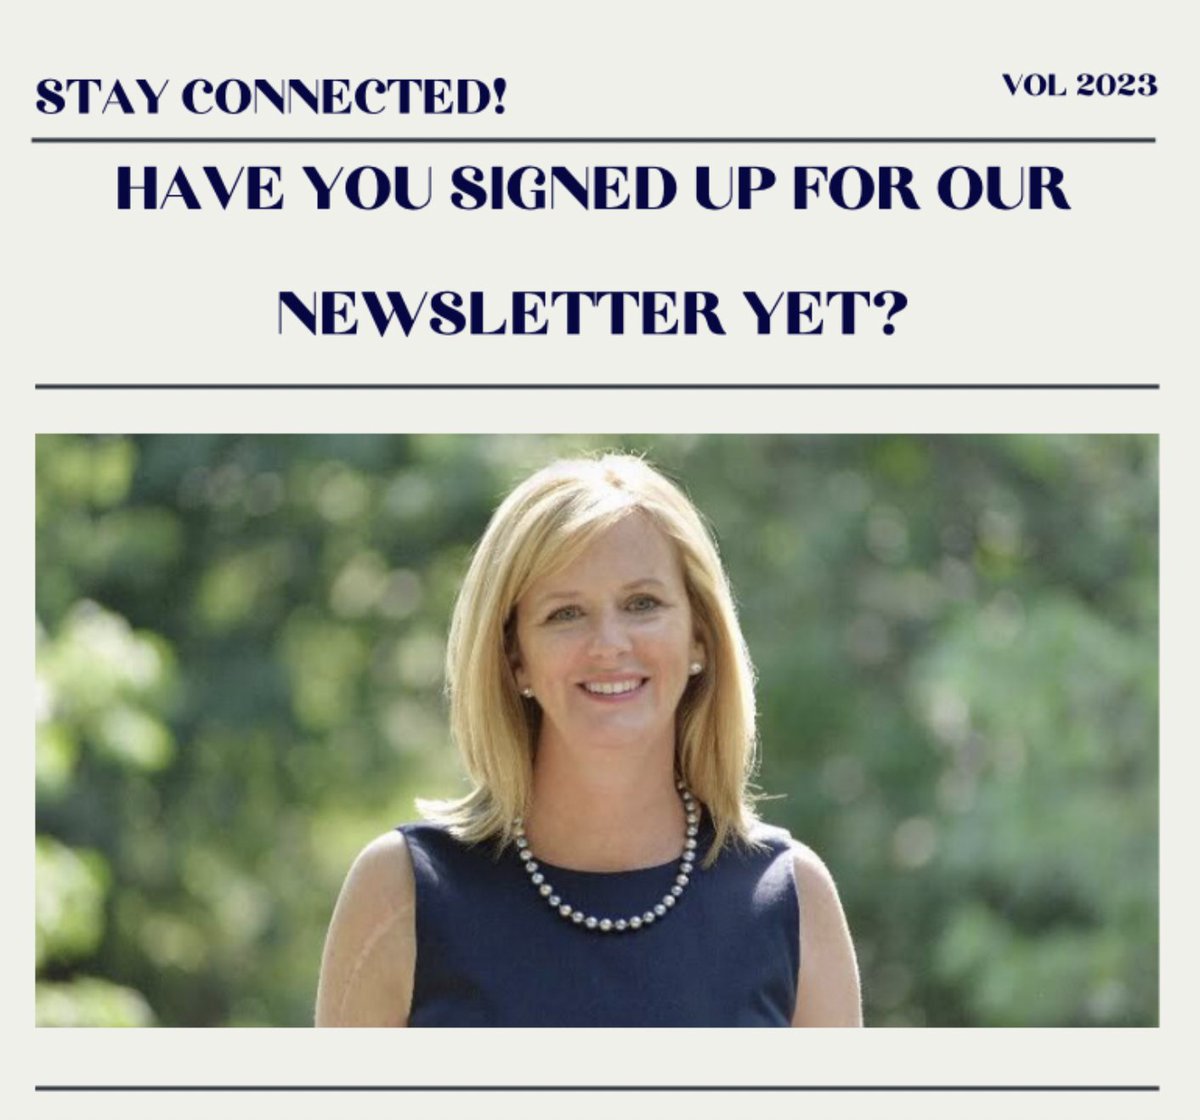 Stay Connected. Sign up for our newsletter so you can stay informed! We often send out press releases and our informative newsletter goes  out every other Saturday! 
SIGN UP HERE: shorturl.at/axyH8
#TeamMurphy #comingtogether #actionnotjustwords #bospoli